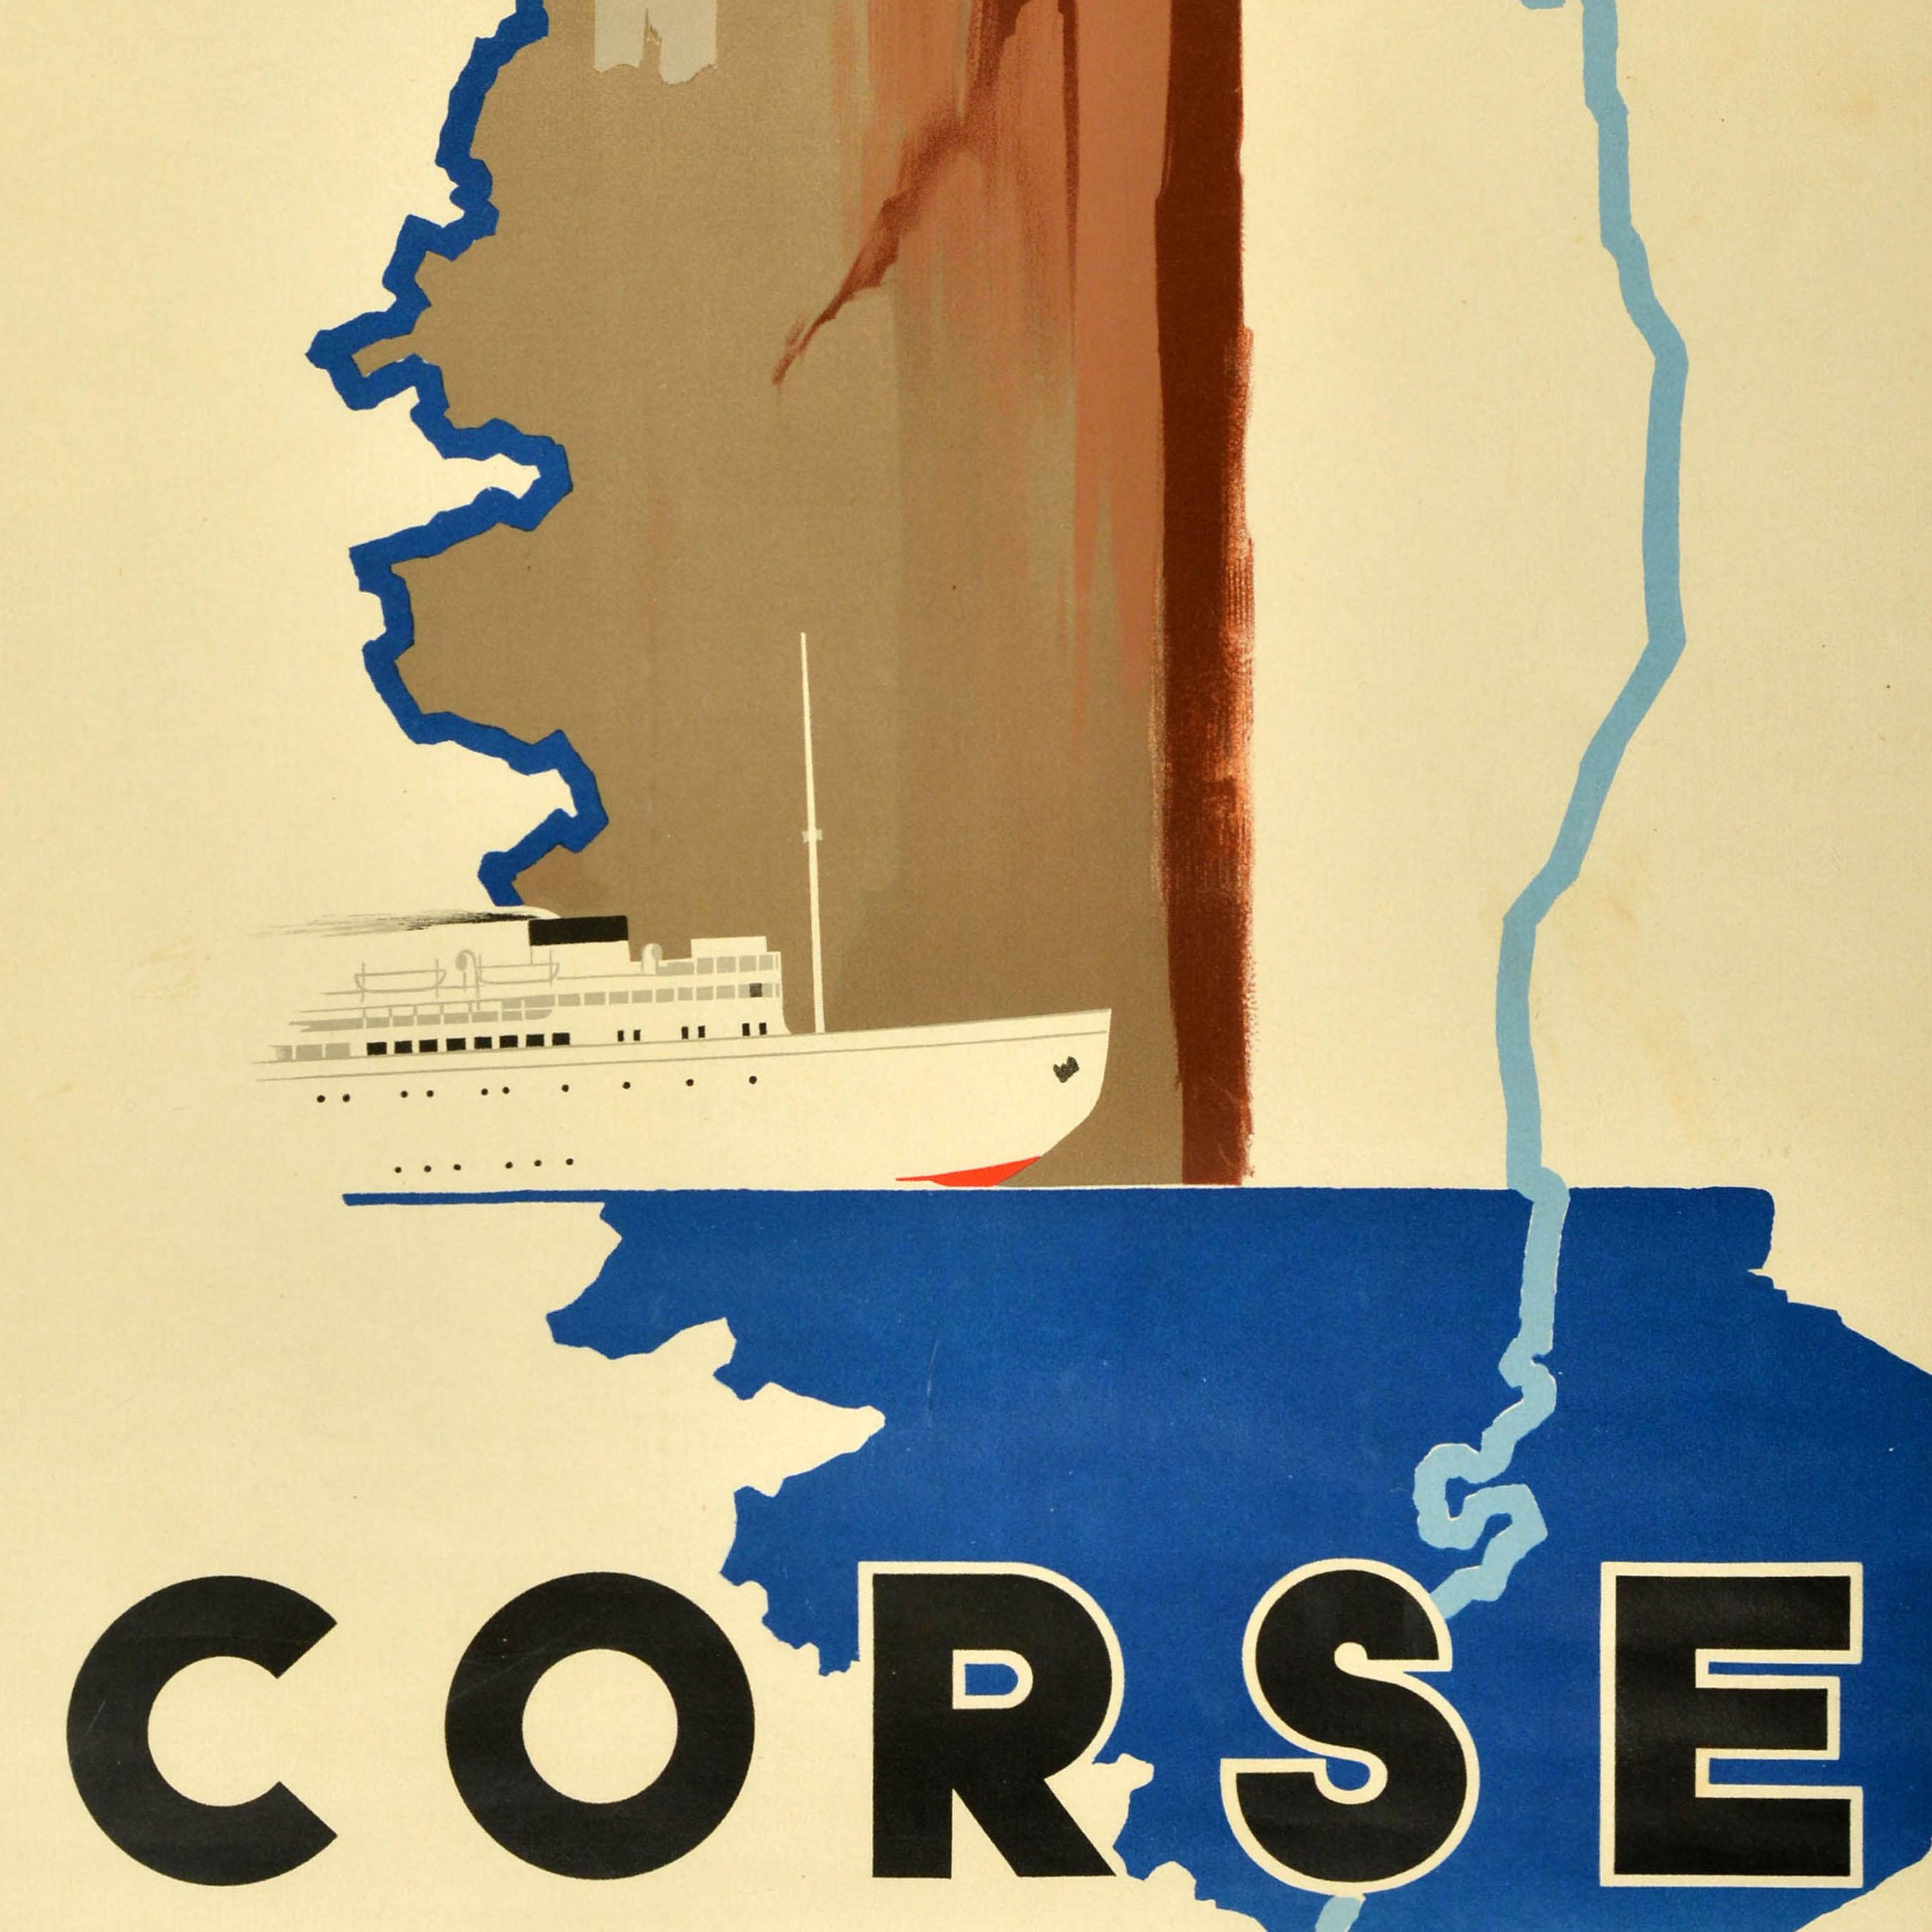 Original vintage train travel poster for Corse / Corsica issued by the state owned French National Railways (SNCF Societe Nationale des Chemins de Fer Francais; founded 1938) featuring an outline of the island and a ship below a rocky cliff with the